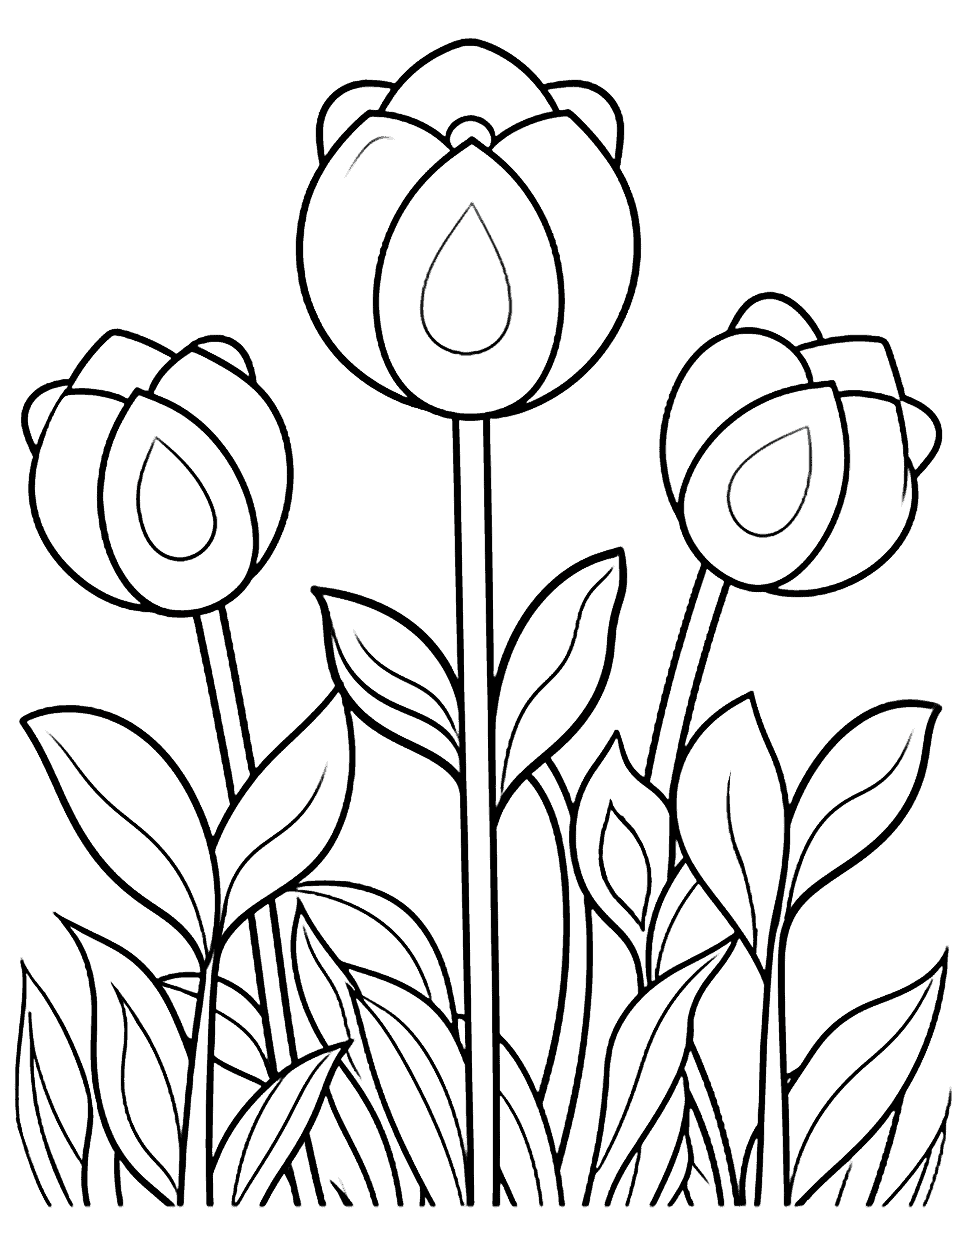 Tulip Field for Kindergarten Flower Coloring Page - An easy and large design featuring a field of tulips, perfect for kindergarteners.